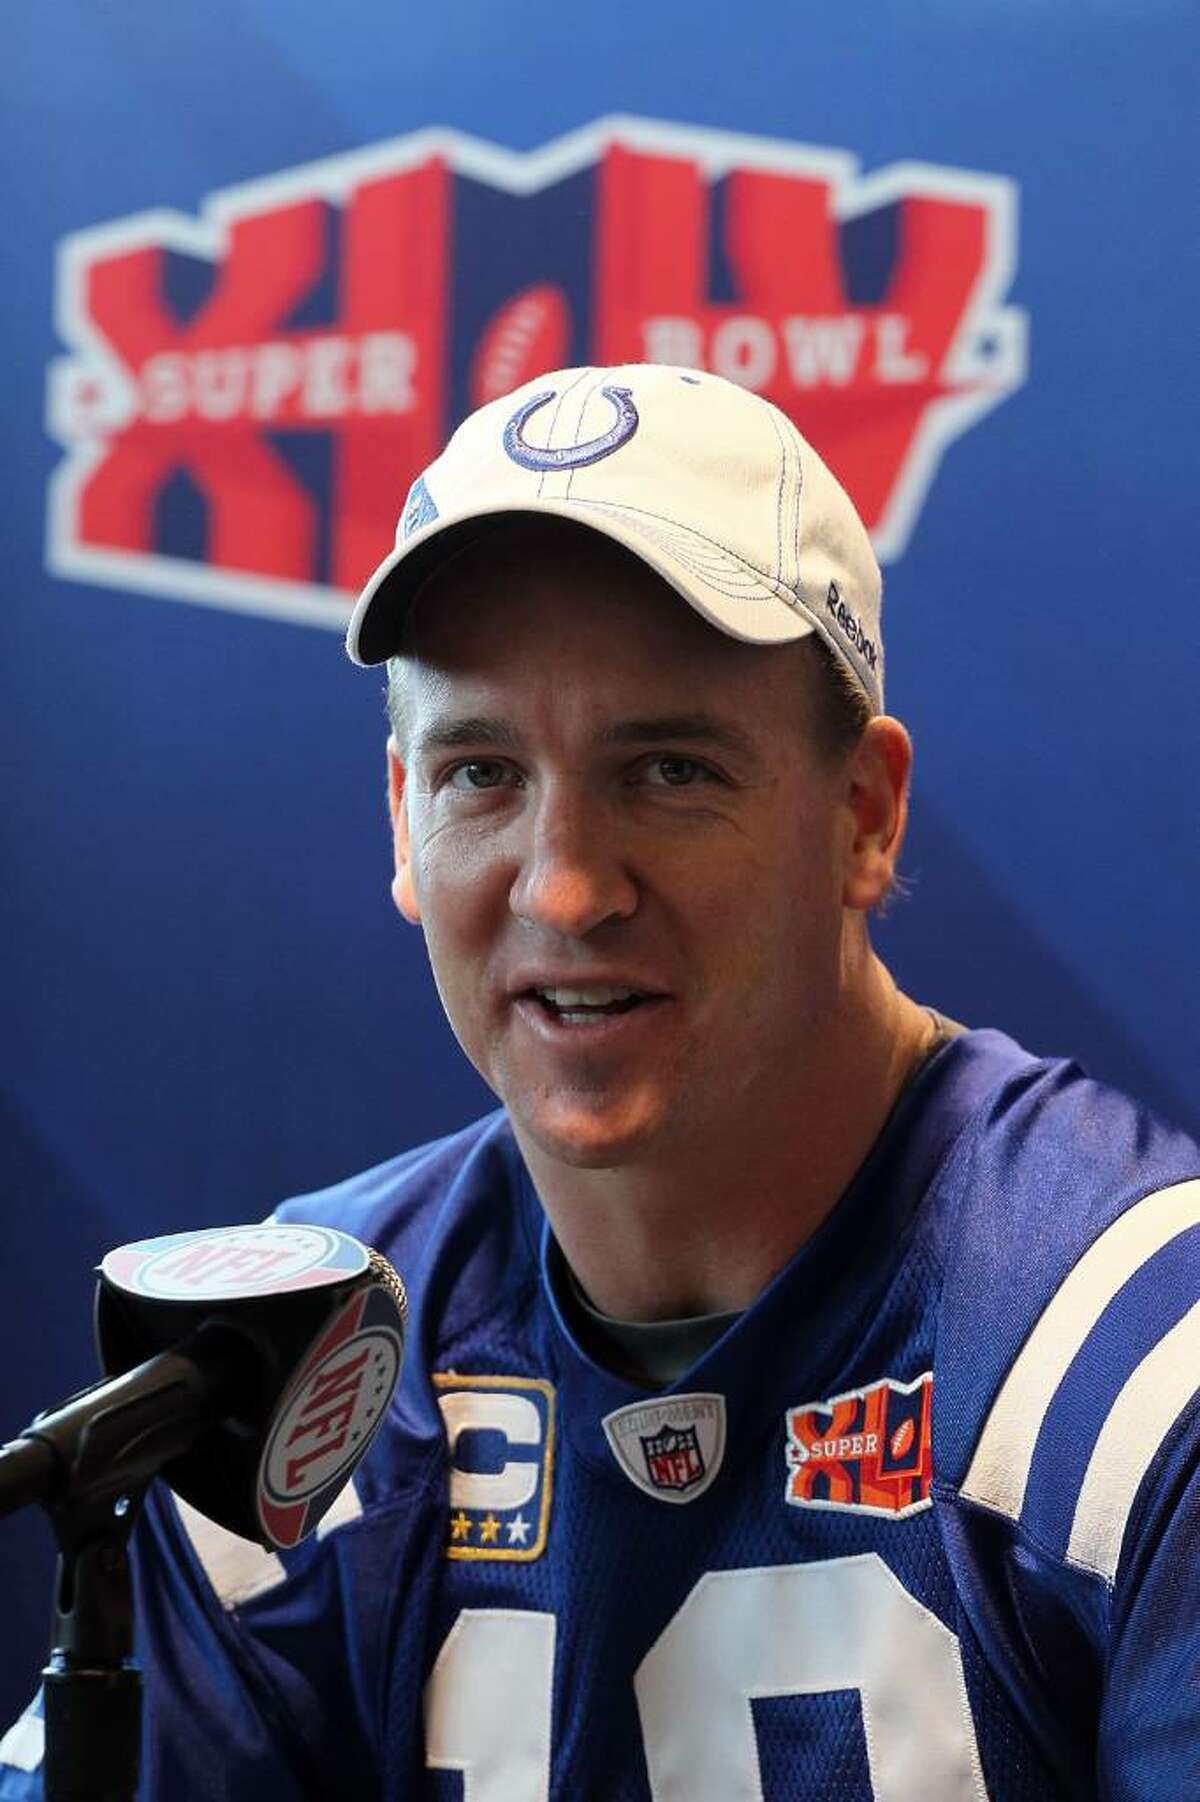 MIAMI GARDENS, FL - FEBRUARY 02: Peyton Manning #18 of the Indianapolis Colts speaks to members of the media during Super Bowl XLIV Media Day at Sun Life Stadium on February 2, 2010 in Miami Gardens, Florida. (Photo by Scott Halleran/Getty Images) *** Local Caption *** Peyton Manning